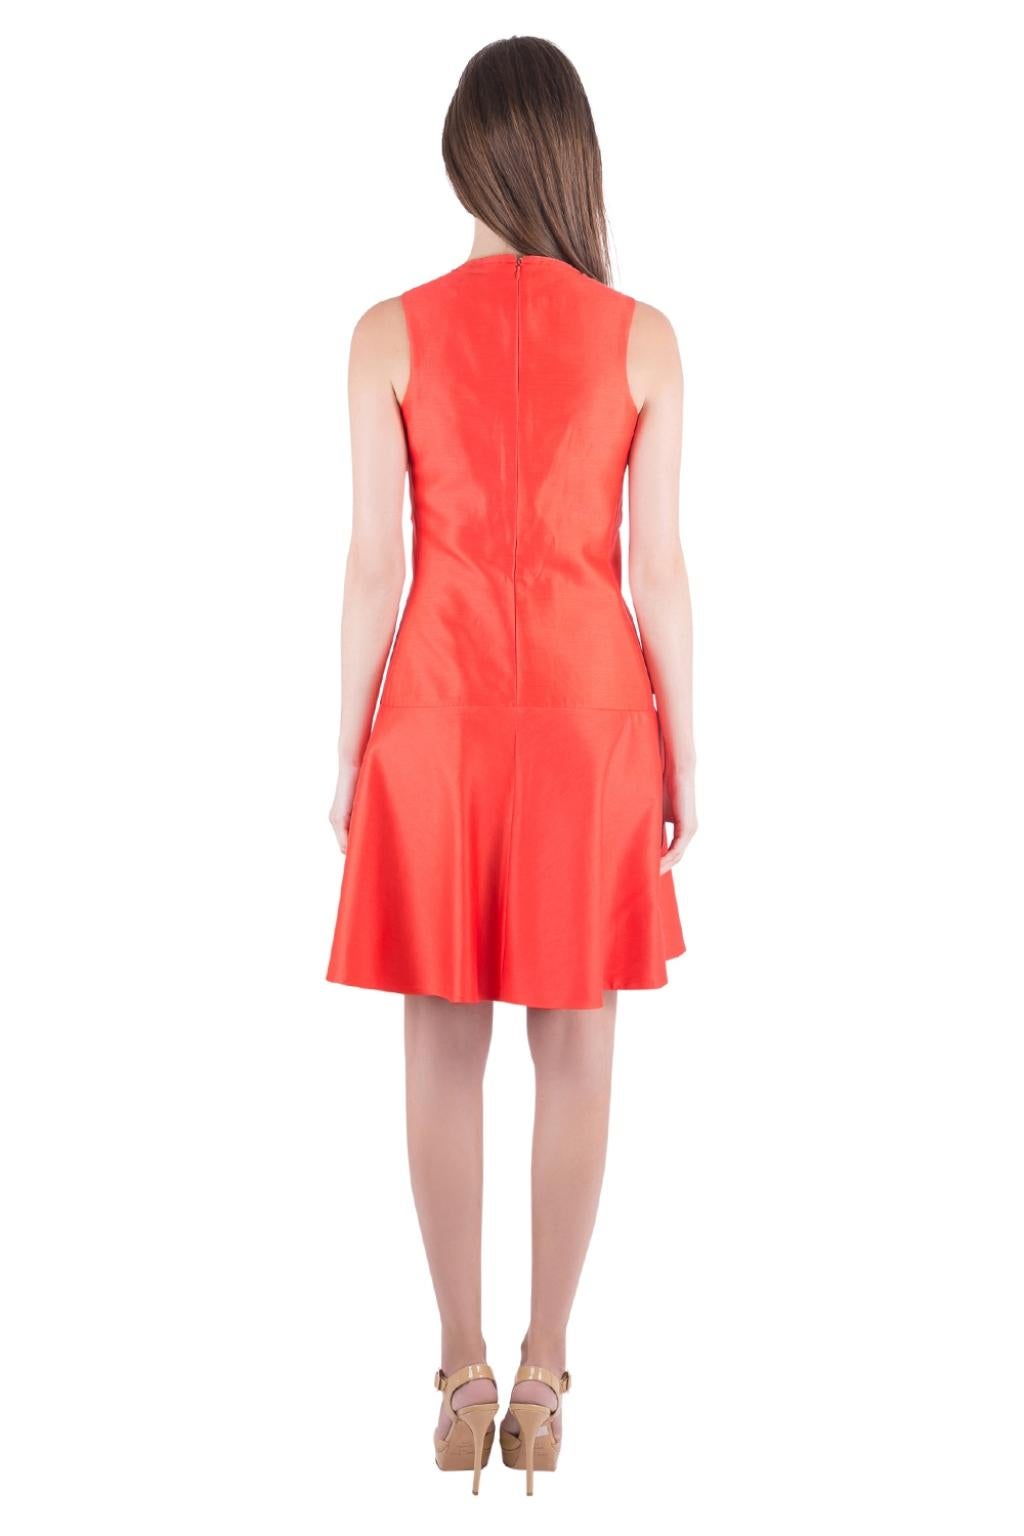 A creation so gorgeous to bring a smile on your face. This Carven sleeveless dress comes in orange color. Tailored from cotton and silk, this drop waist dress provides a great fit. It features two external pockets and a zip closure.

Includes: The